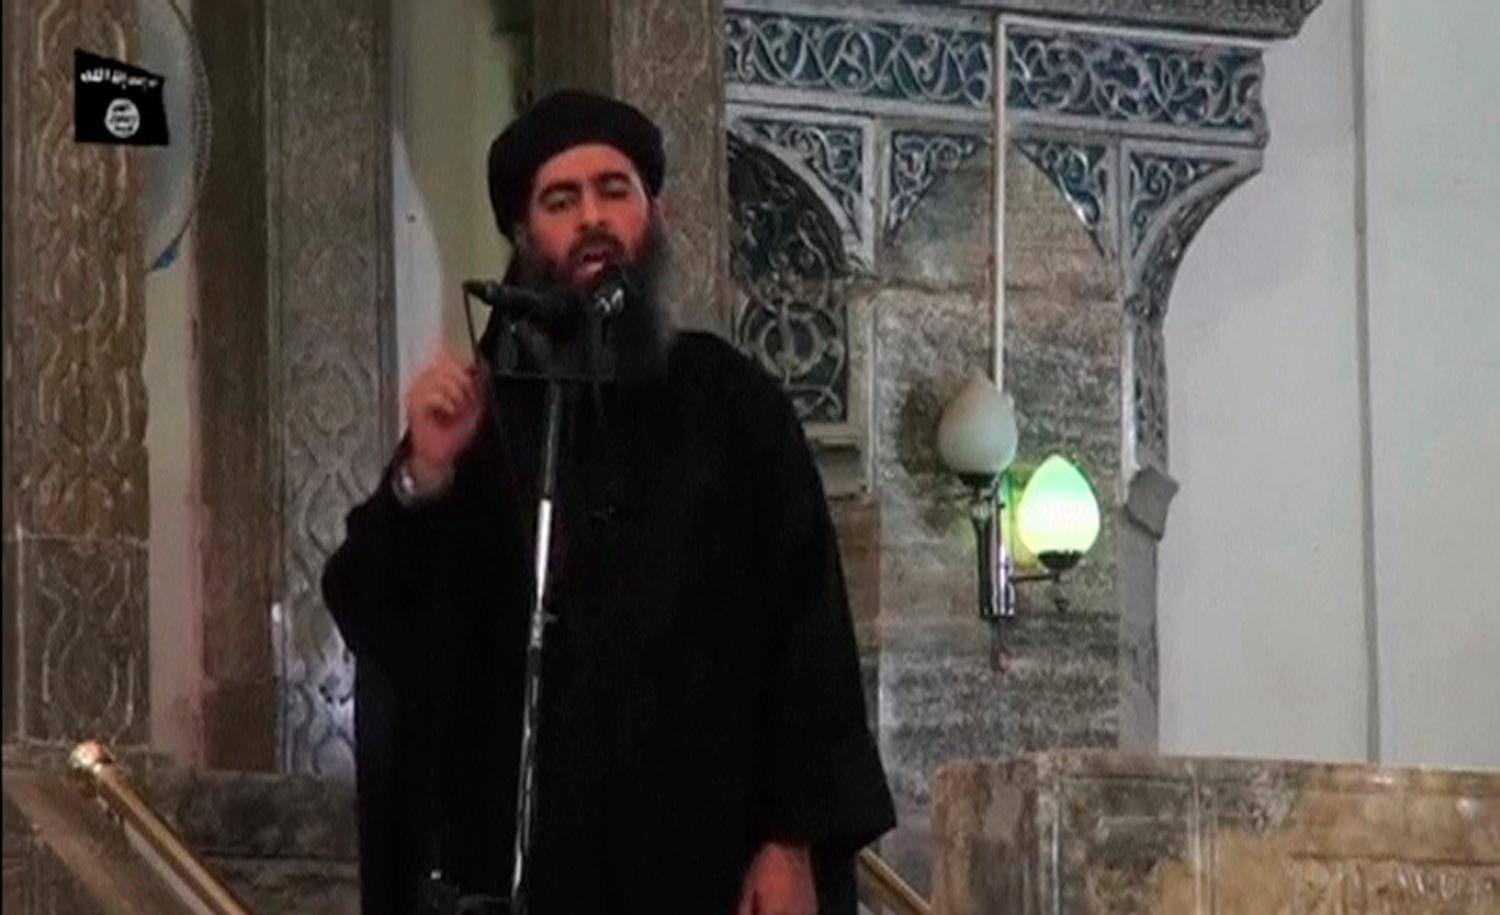 A man purported to be Abu Bakr al-Baghdadi, the leader of the miltant group ISIS, during what would have been his first public appearance at a mosque in Mosul, according to a video recording posted on the Internet.